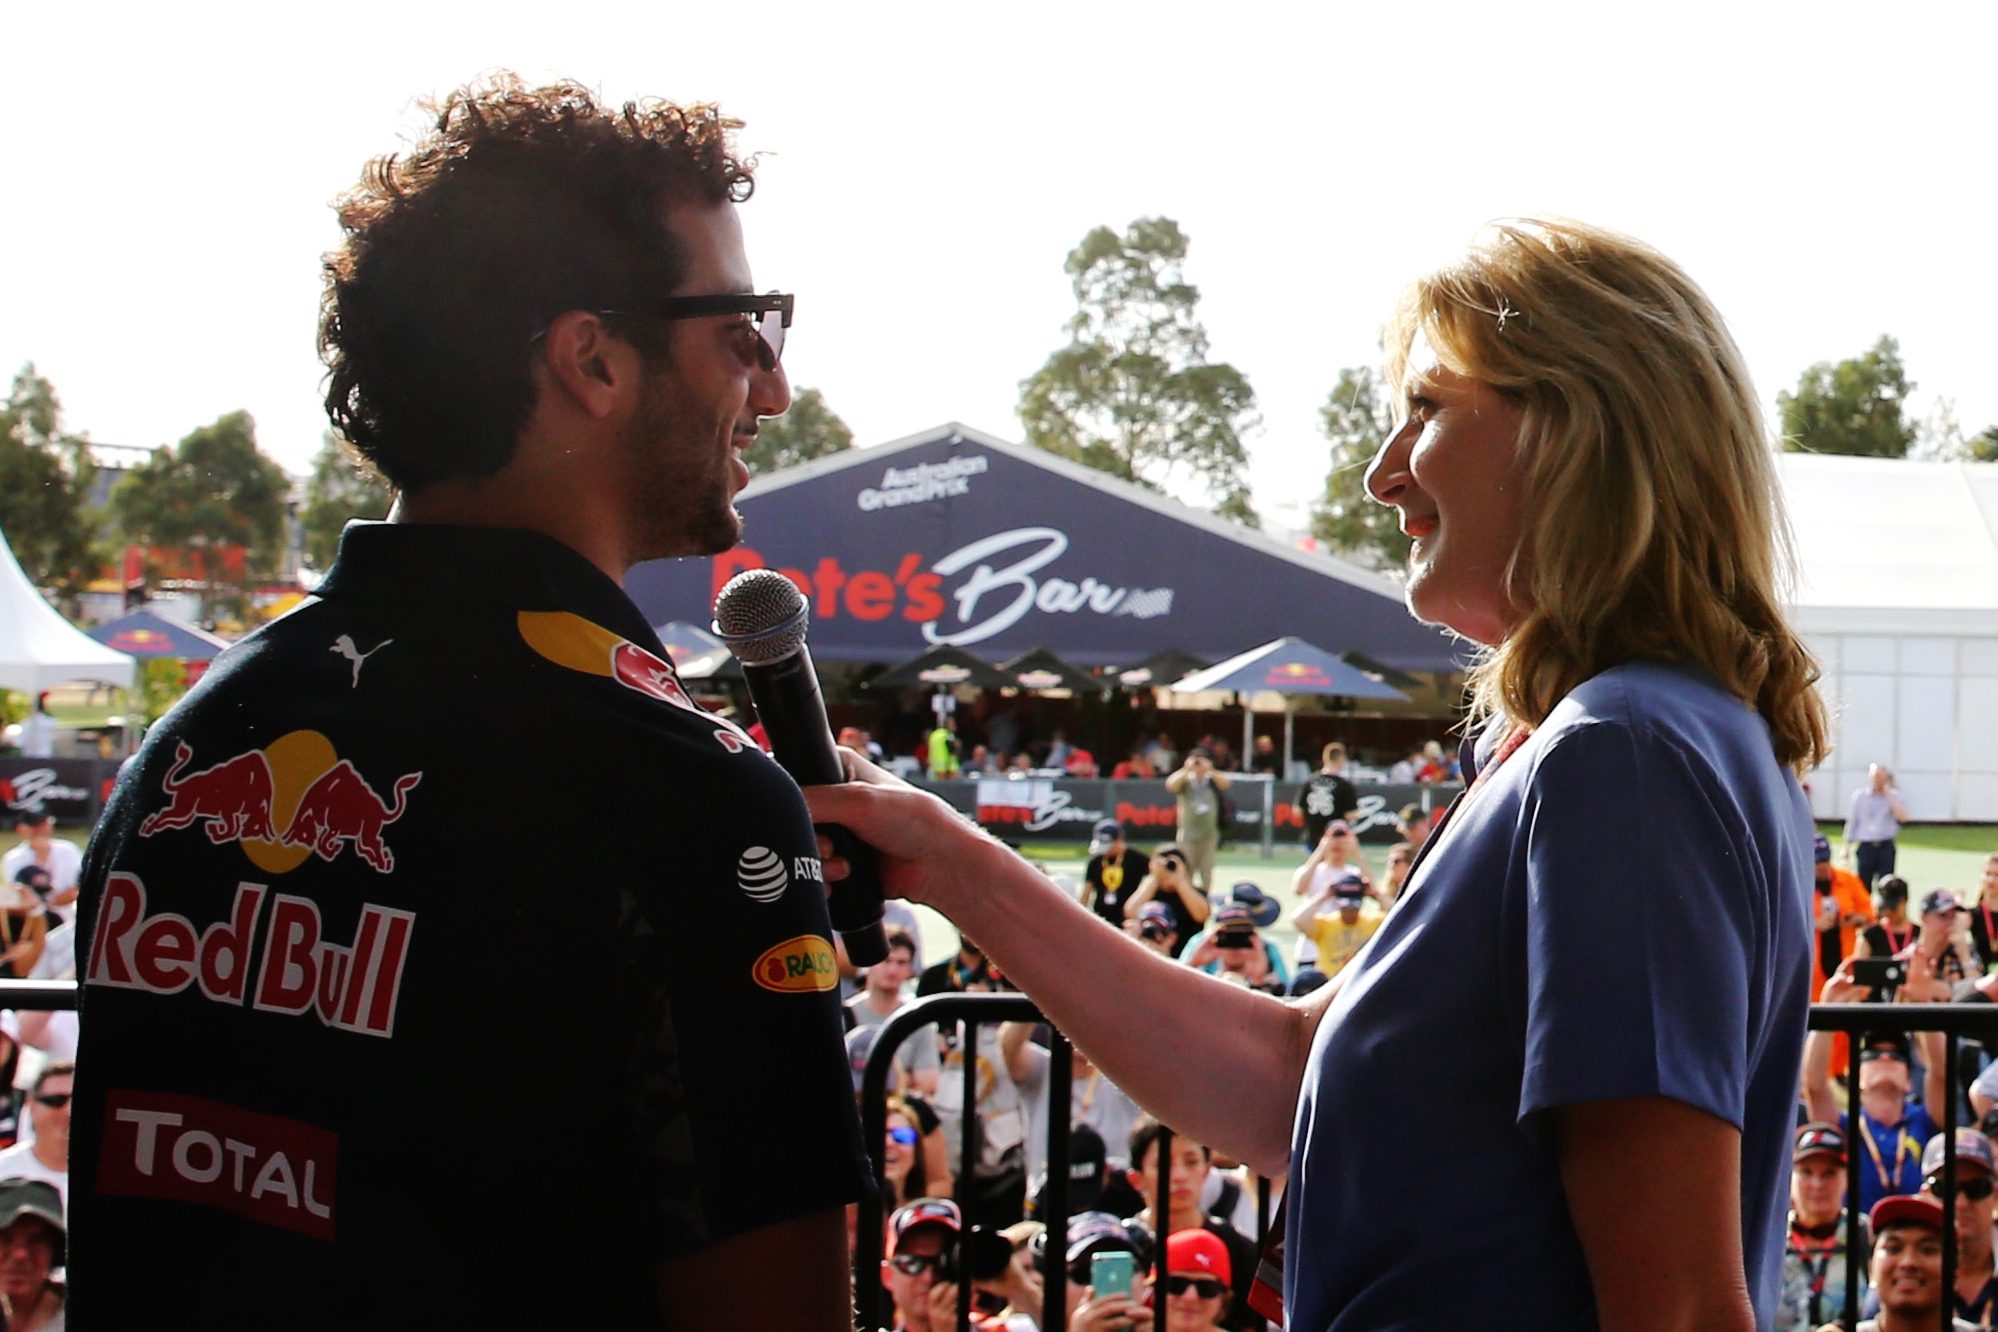 MELBOURNE, AUSTRALIA - MARCH 17: Daniel Ricciardo of Australia and Red Bull Racing and Daniil Kvyat of Russia and Red Bull Racing talk to Louise Goodman and fans on stage during previews to the Australian Formula One Grand Prix at Albert Park on March 17, 2016 in Melbourne, Australia.  (Photo by Mark Thompson/Getty Images)